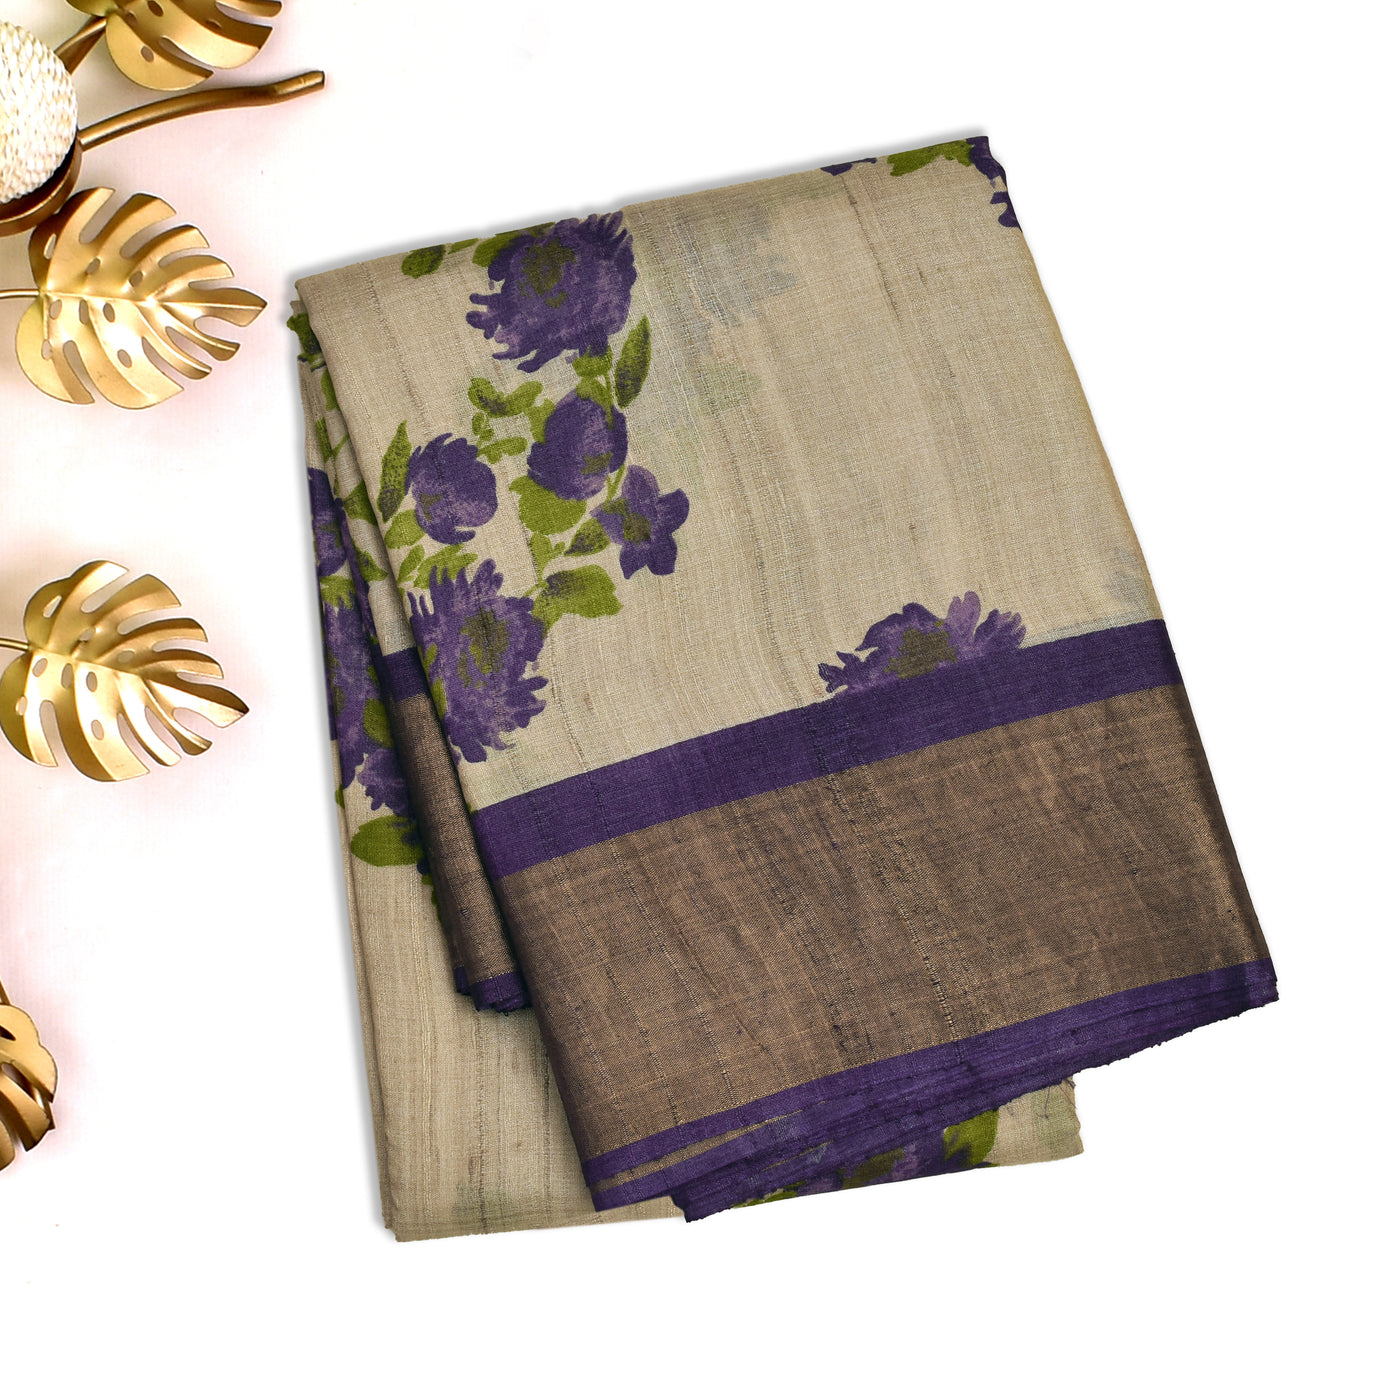 Off White Tussar Silk Saree with Floral Printed Design